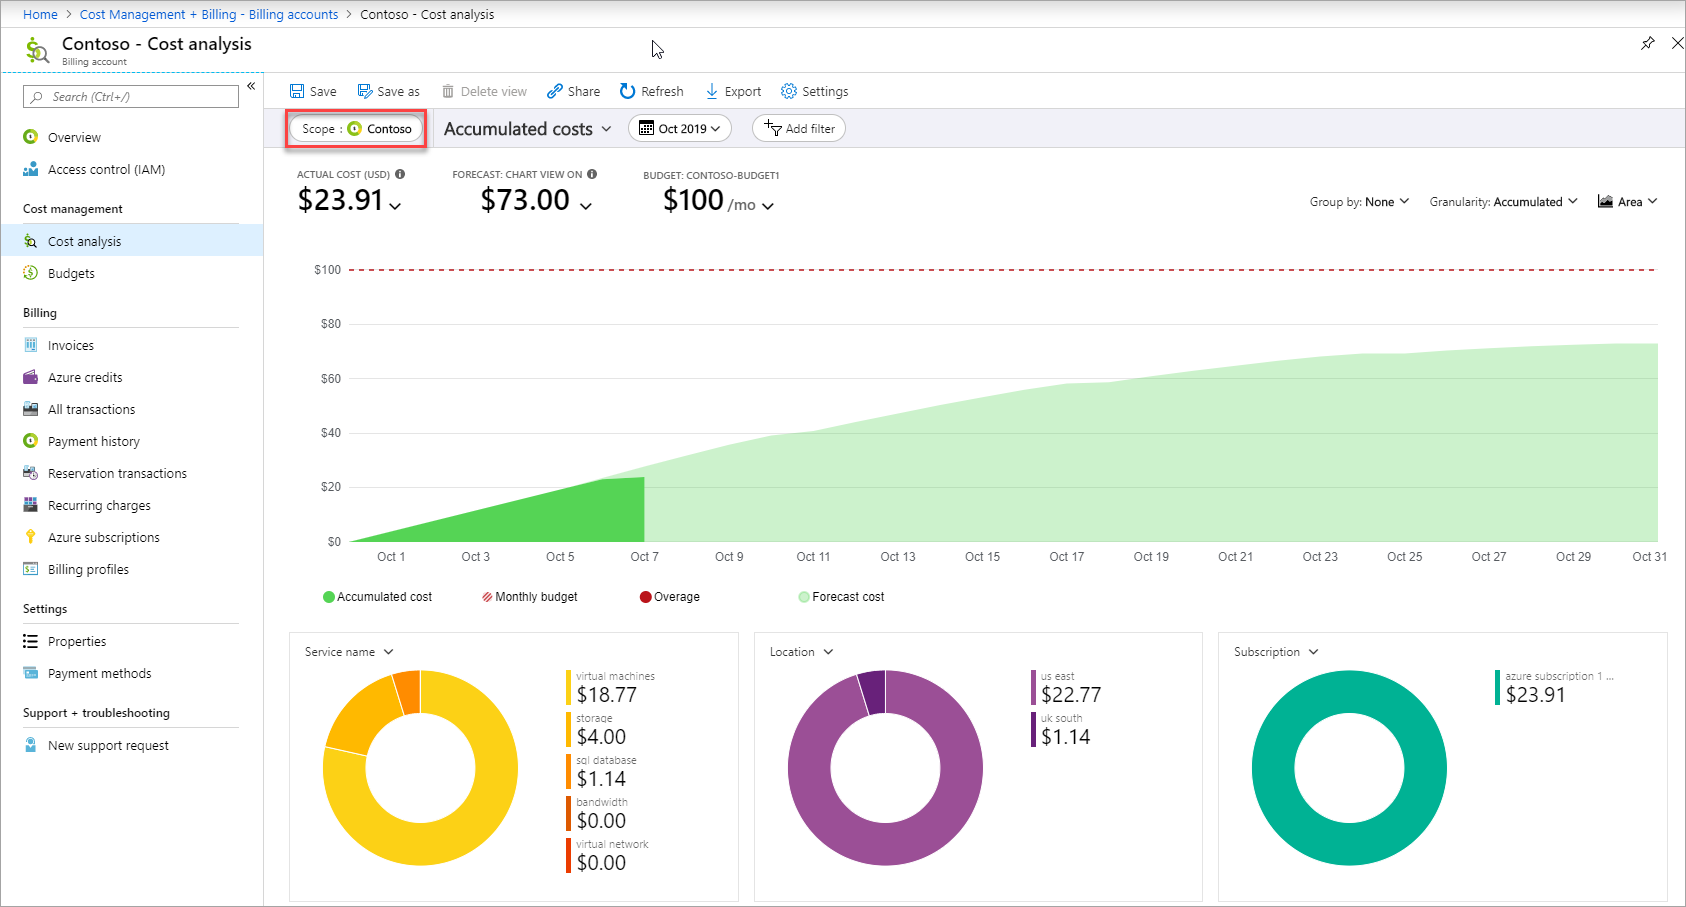 Screenshot of the cost analysis view in Azure portal